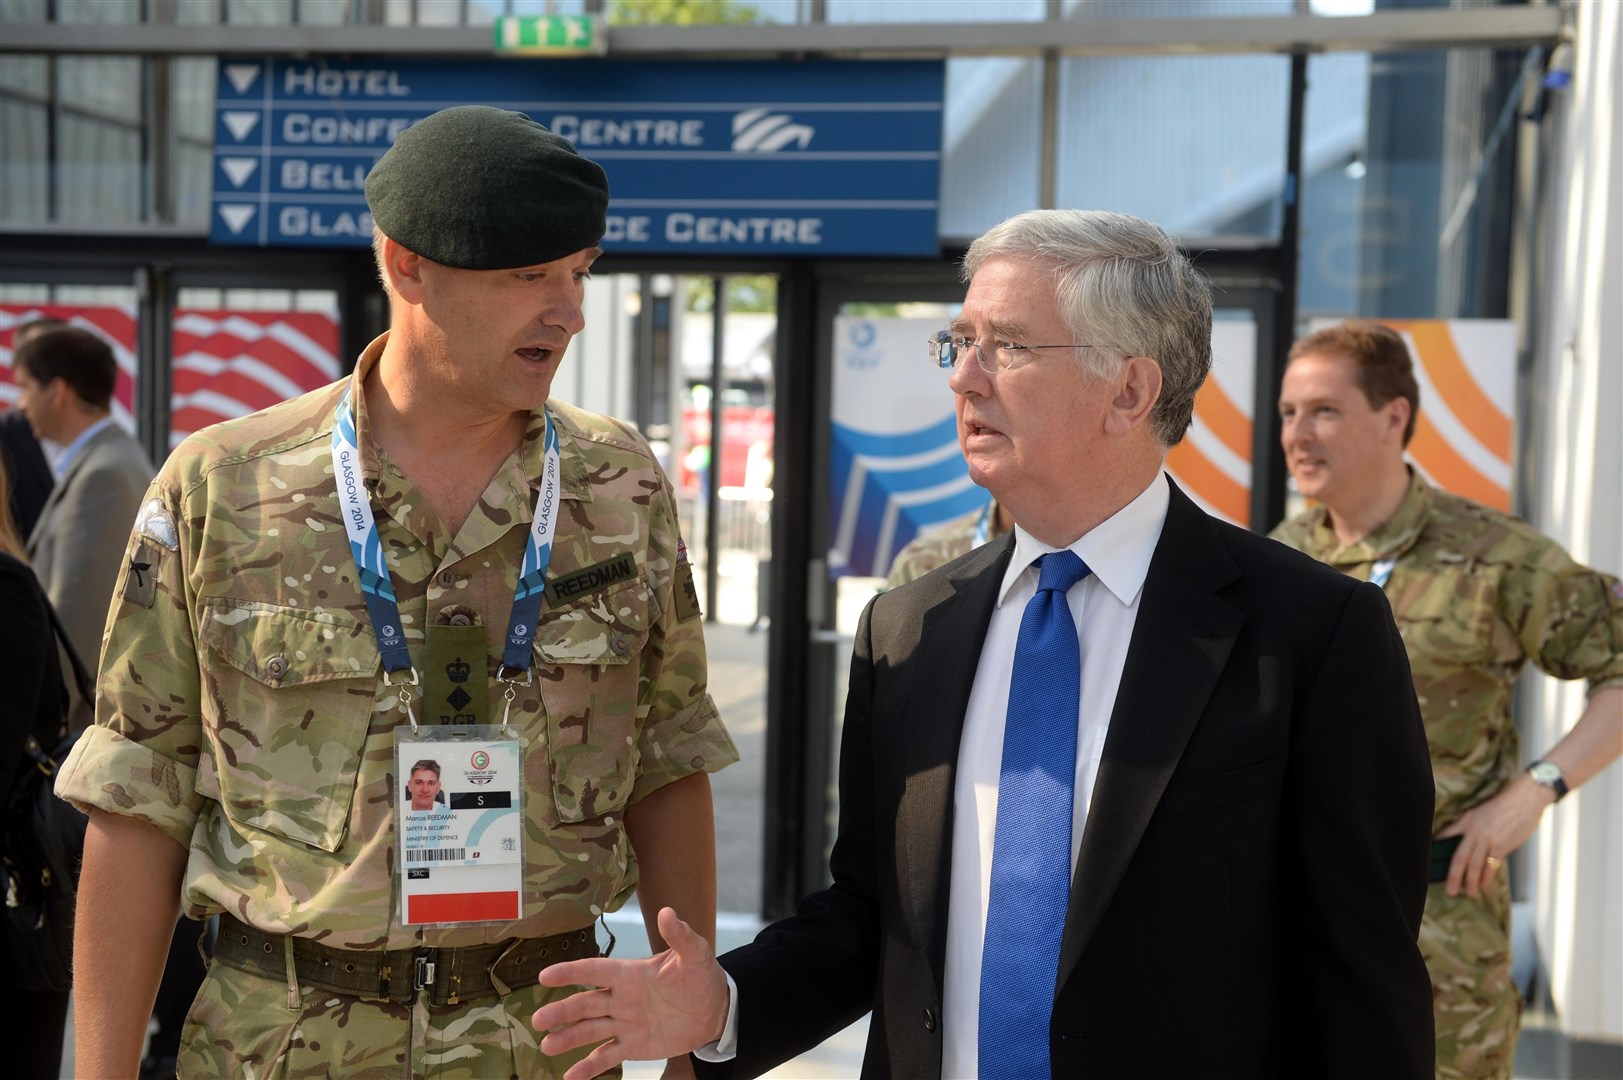 Marcus Reedman, left with the then Defence Secretary Michael Fallon at the Commonwealth Games in Glasgow in 2014 (Mark Owens/PA)